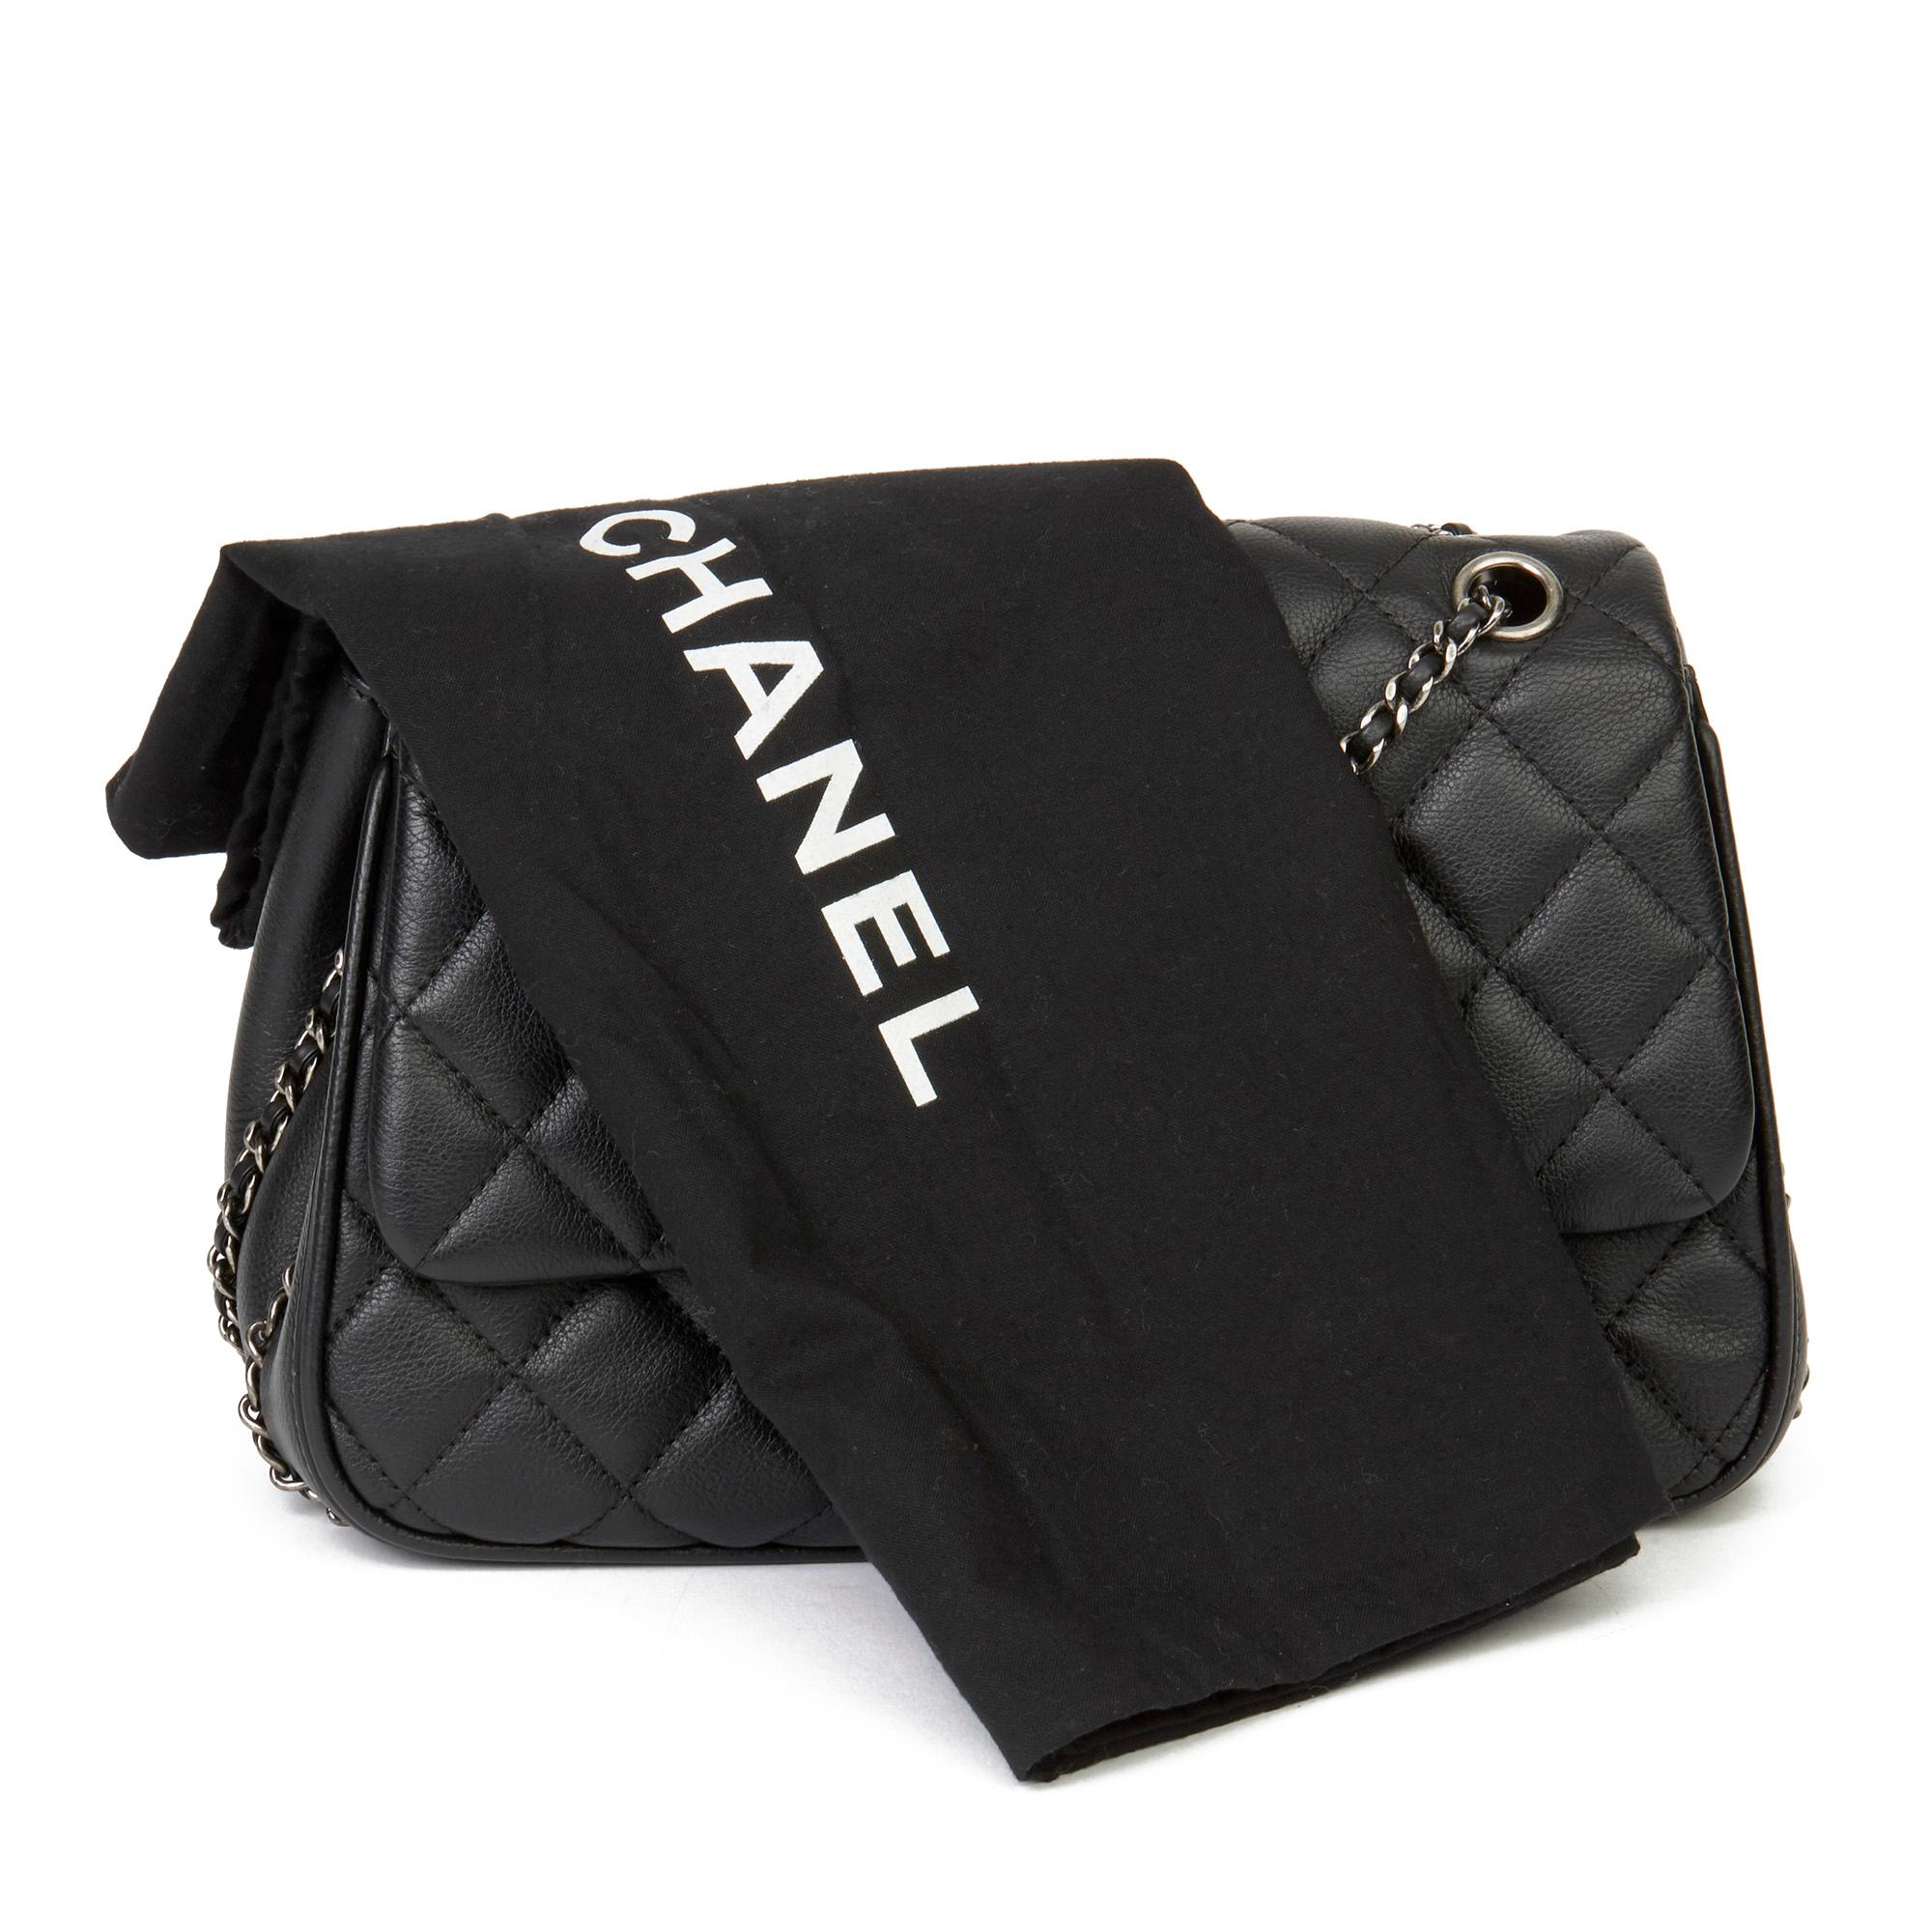 2017 Chanel Black Quilted Calfskin Leather Medium Frame in Chain Flap Bag 5